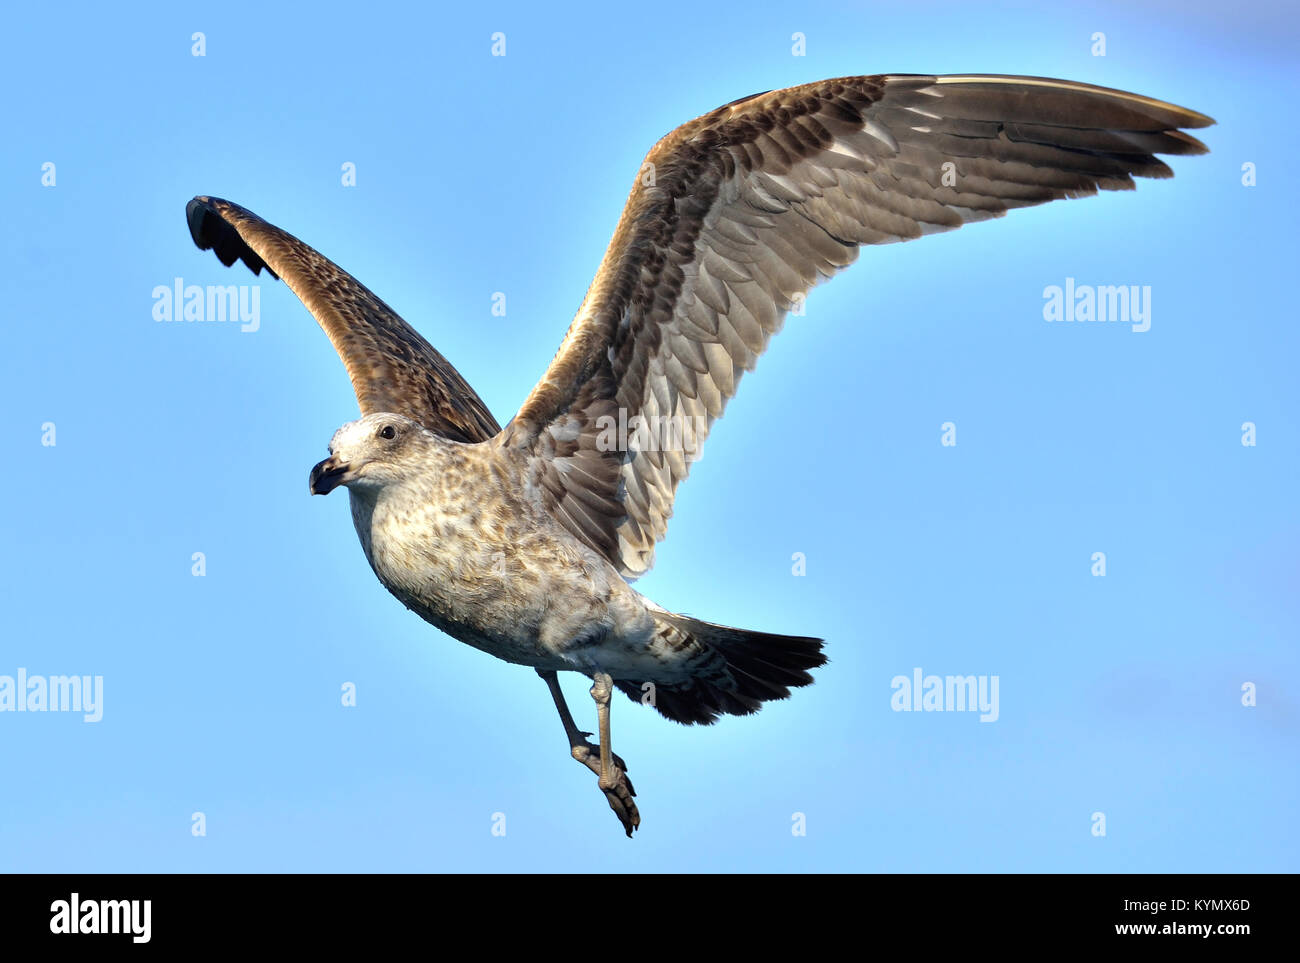 Flying Juvenile  Kelp gull (Larus dominicanus), also known as the Dominican gull and Black Backed Kelp Gull. Blue sky background. False Bay, South Afr Stock Photo